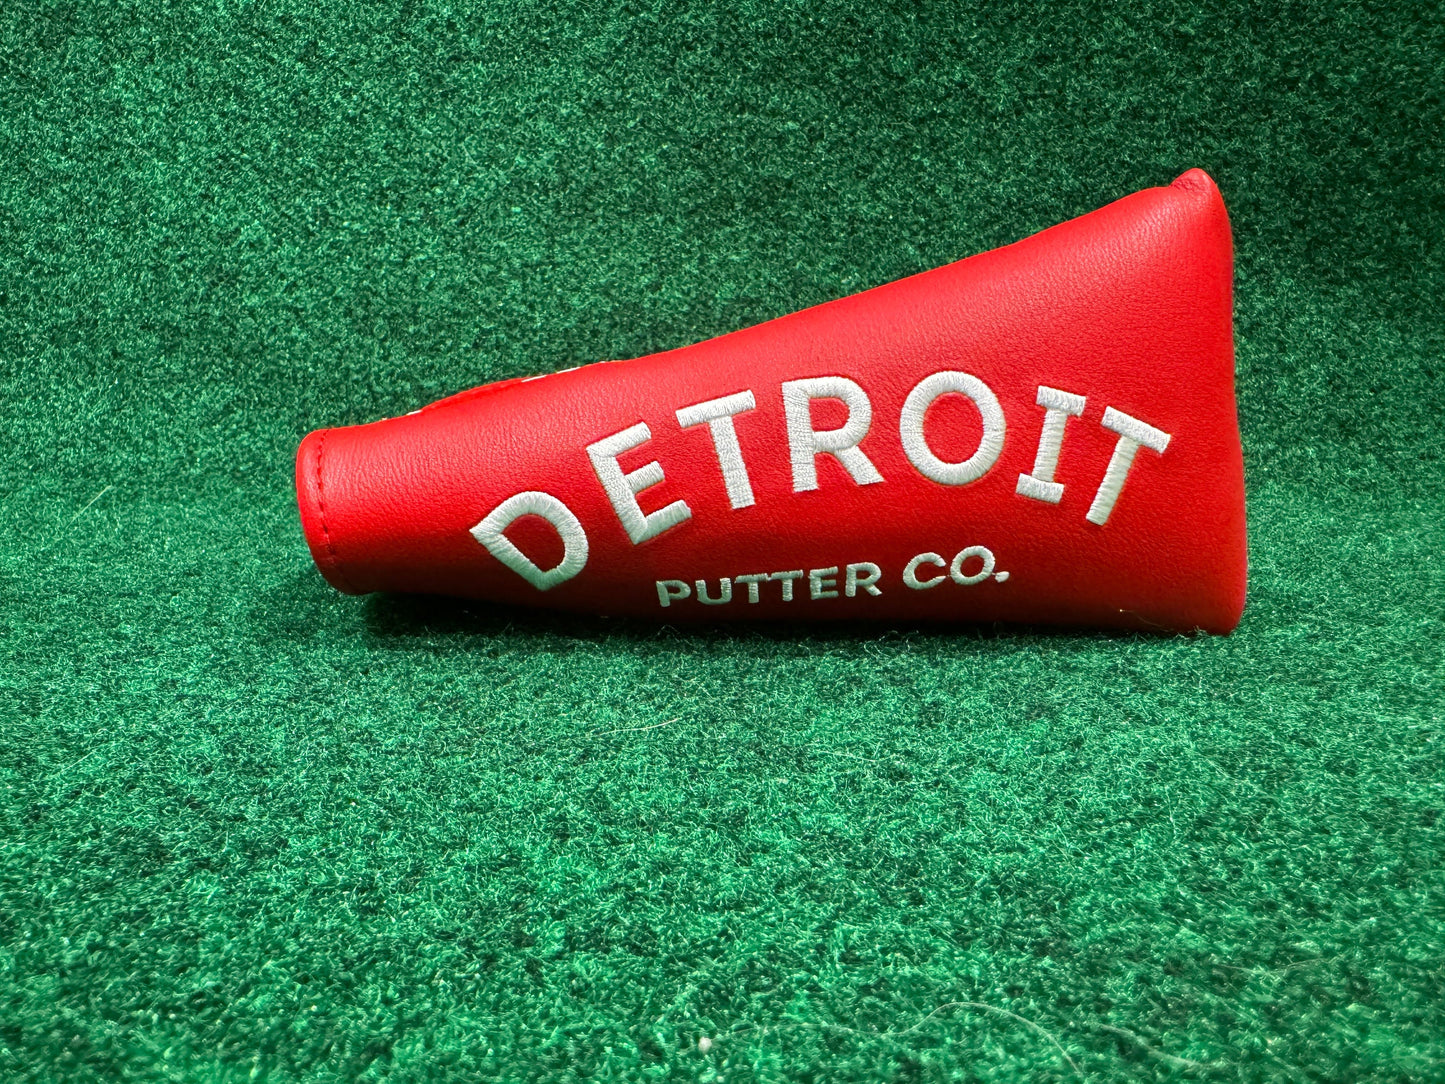 DANCIN' MITTEN BLADE HEAD COVER - NEW LIMITED EDITION COLORS